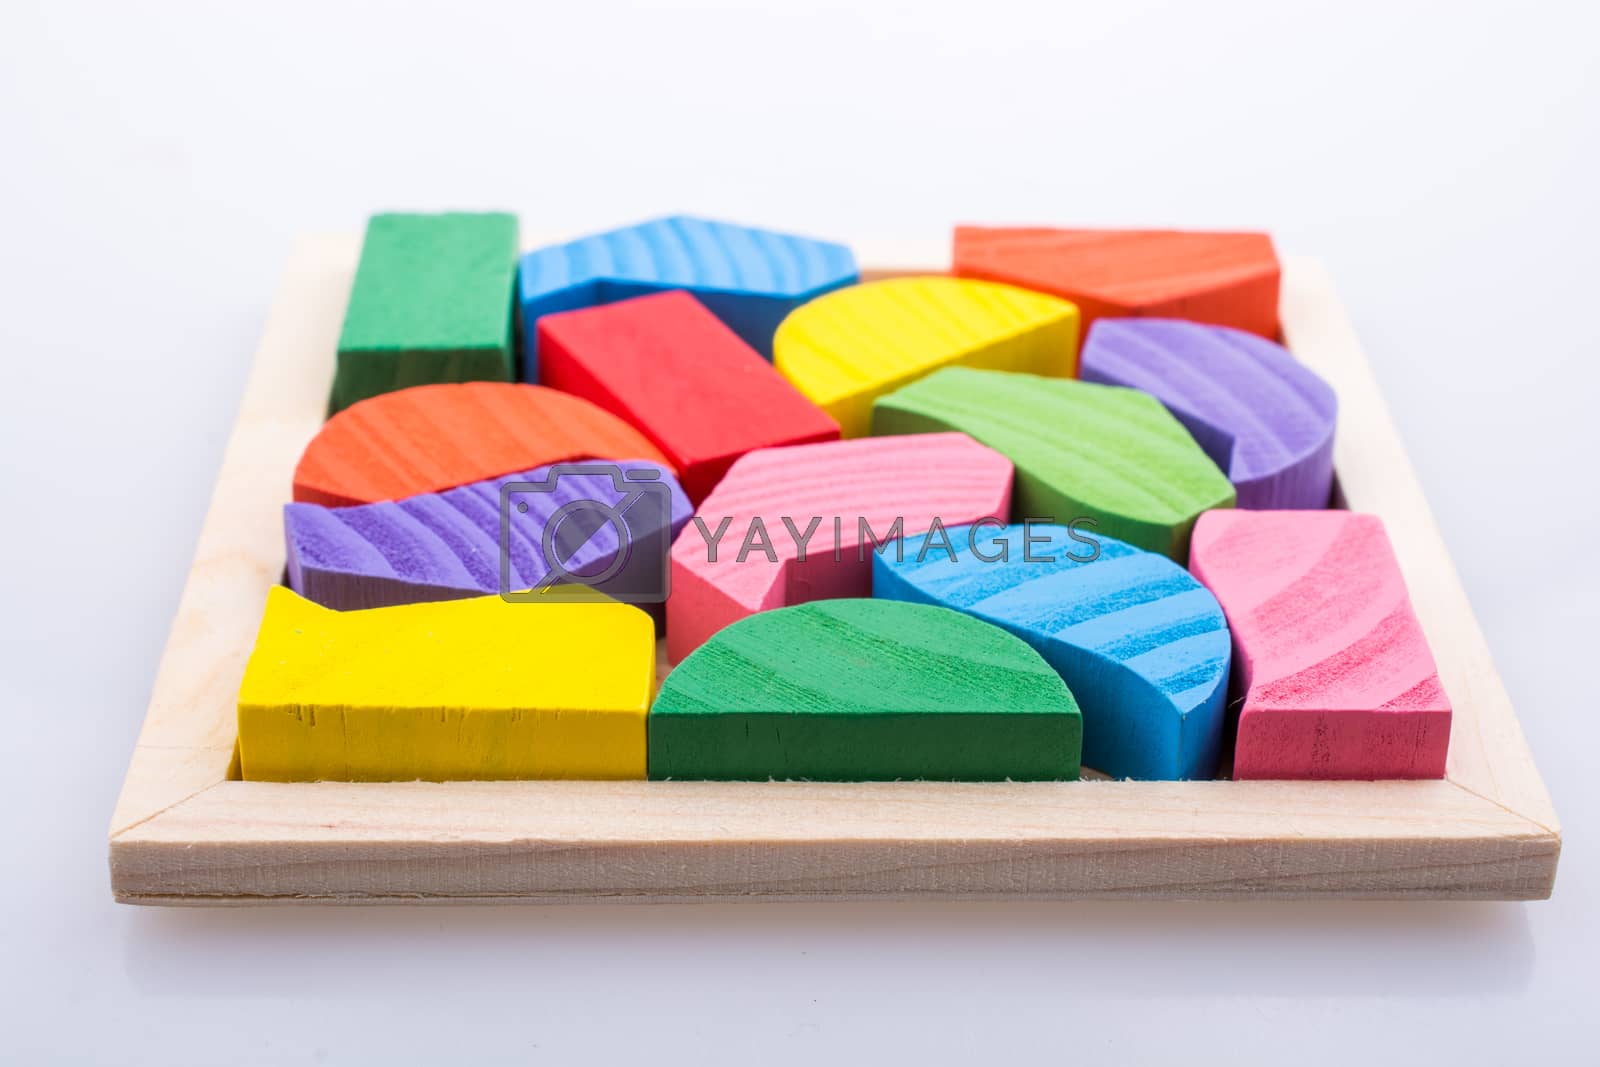 Royalty free image of Colorful  pieces of a logic puzzle  by berkay